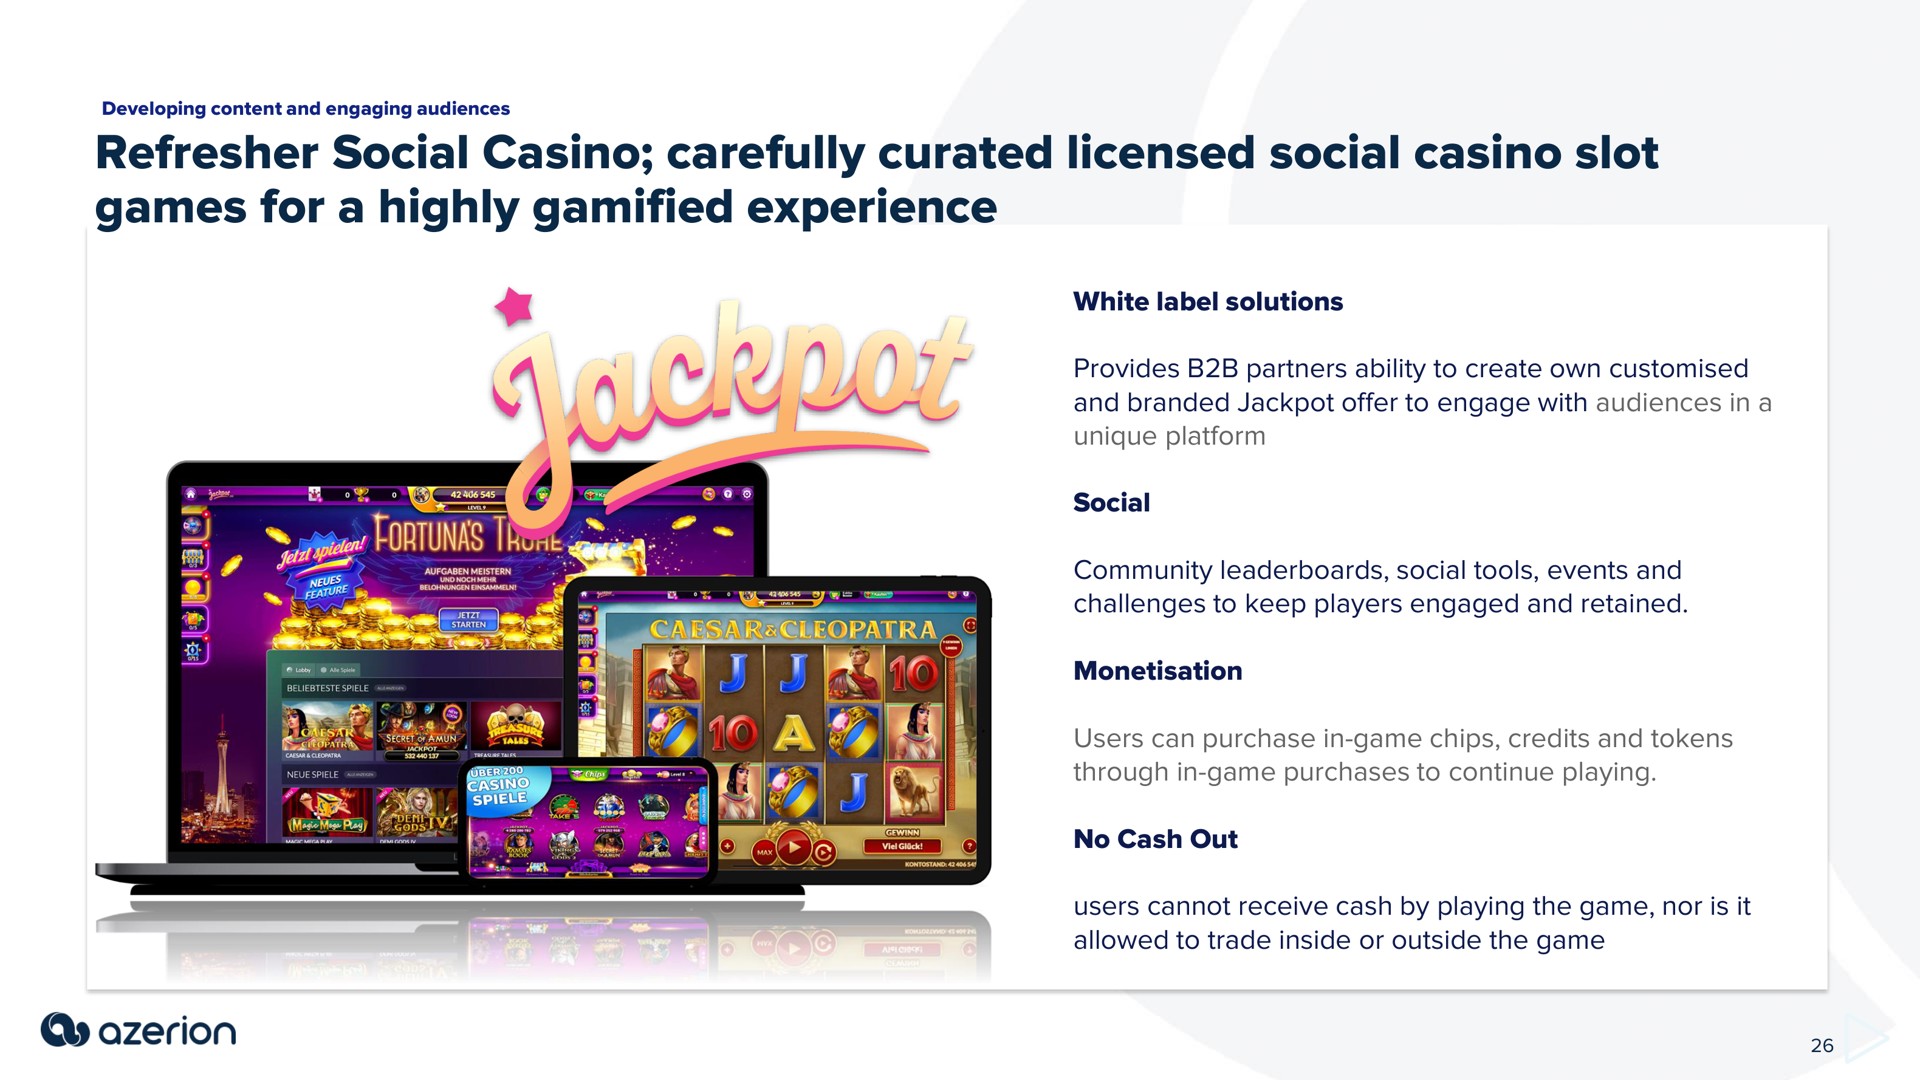 refresher social casino carefully licensed social casino slot games for a highly experience | Azerion